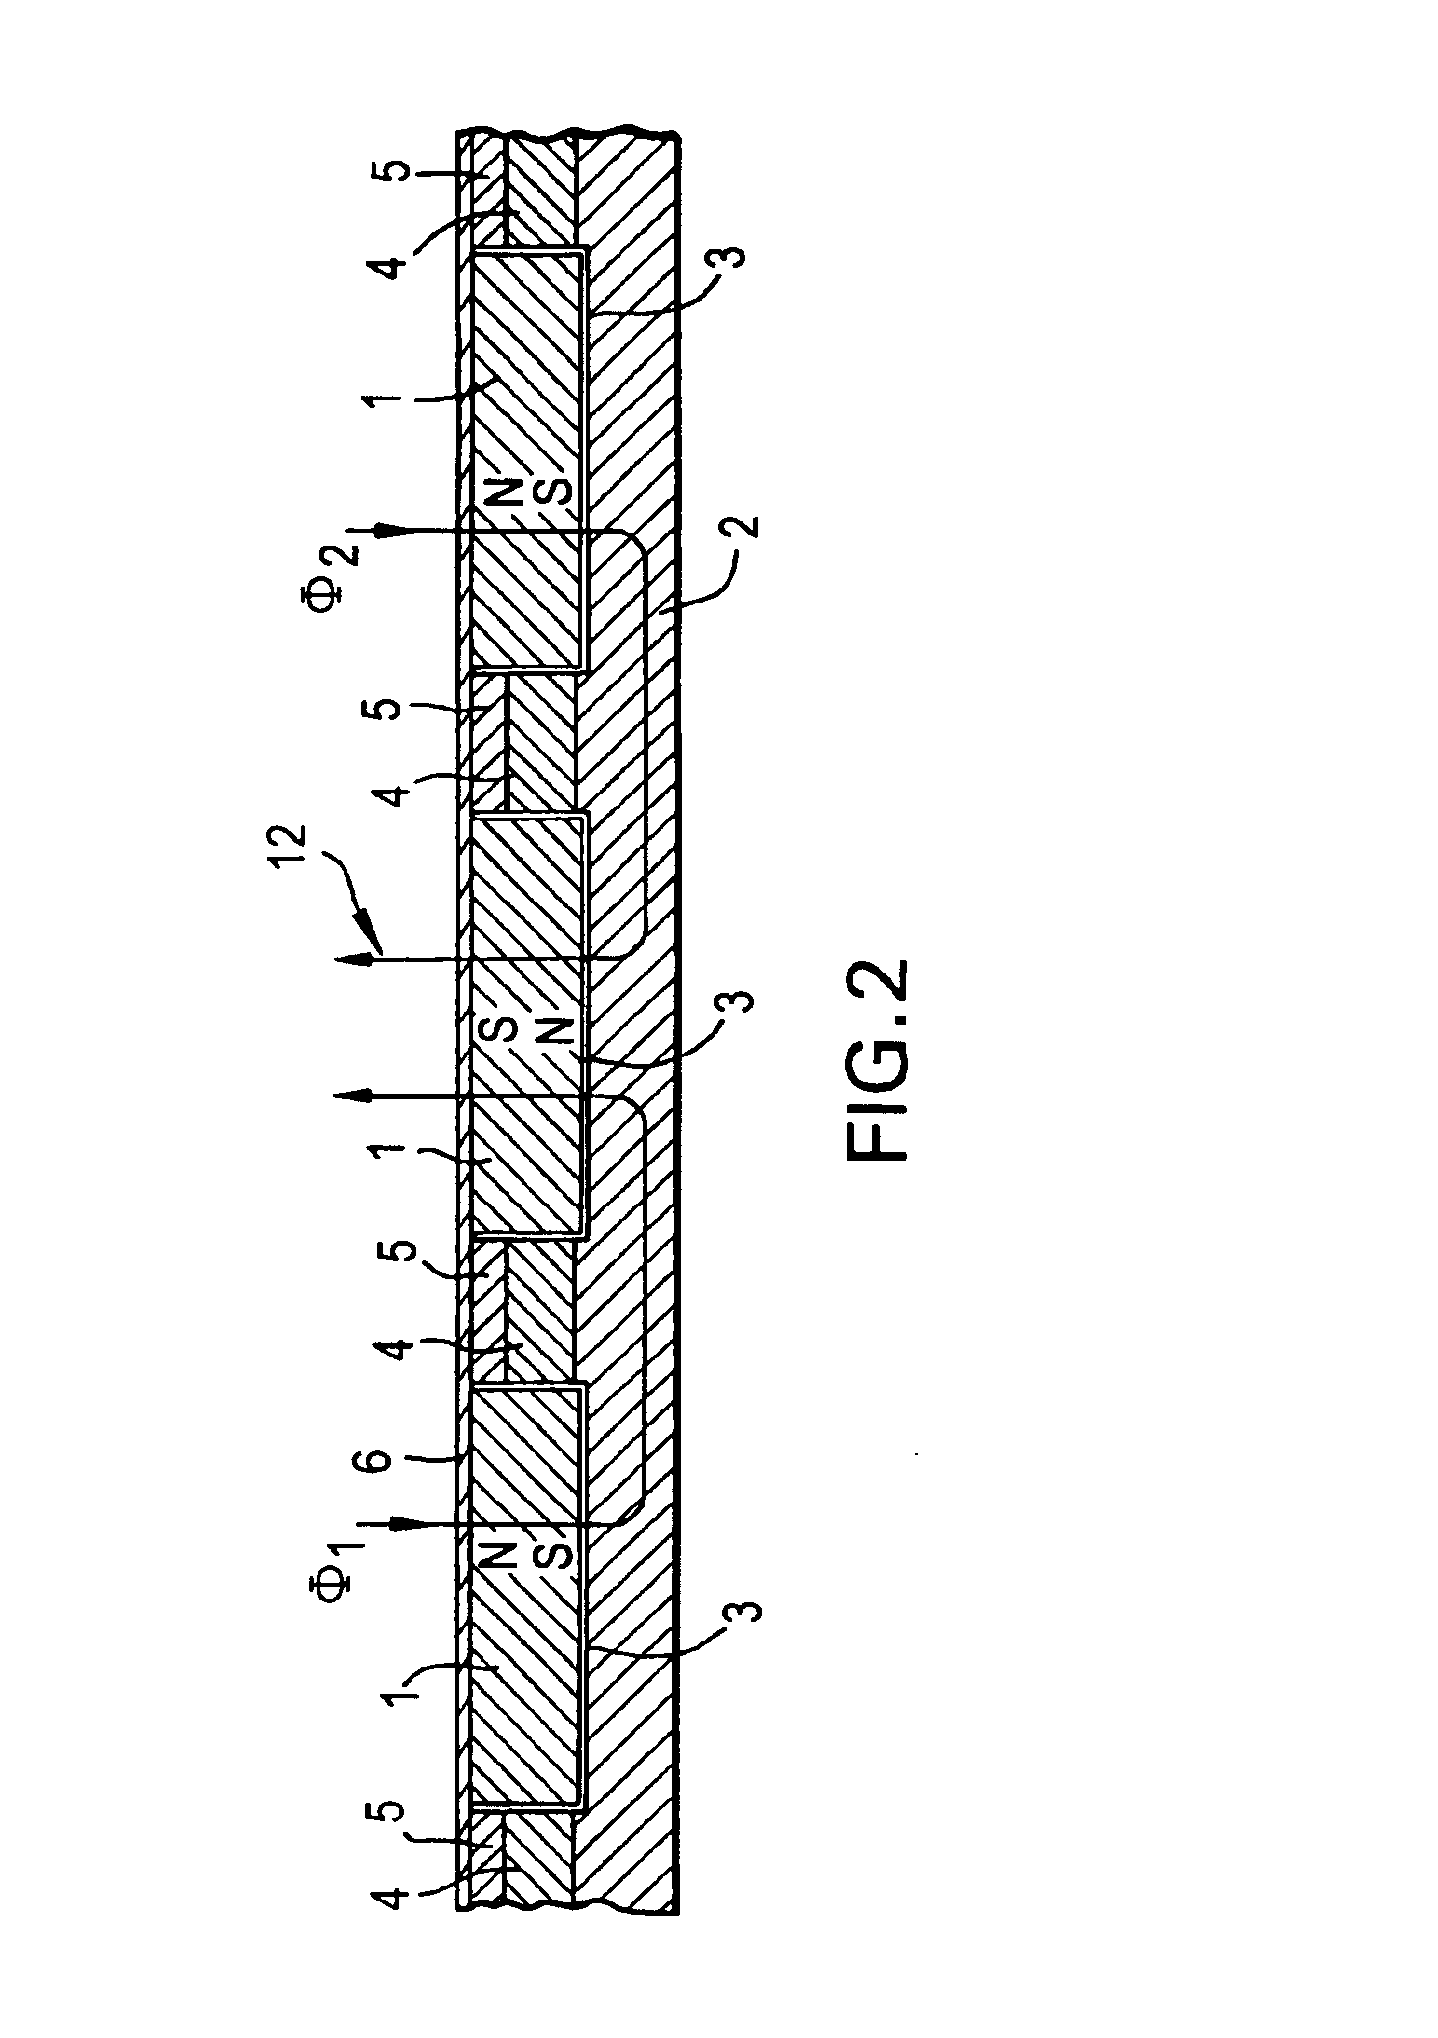 Linear synchronous motor with multiple time constant circuits, a secondary synchronous stator member and improved method for mounting permanent magnets